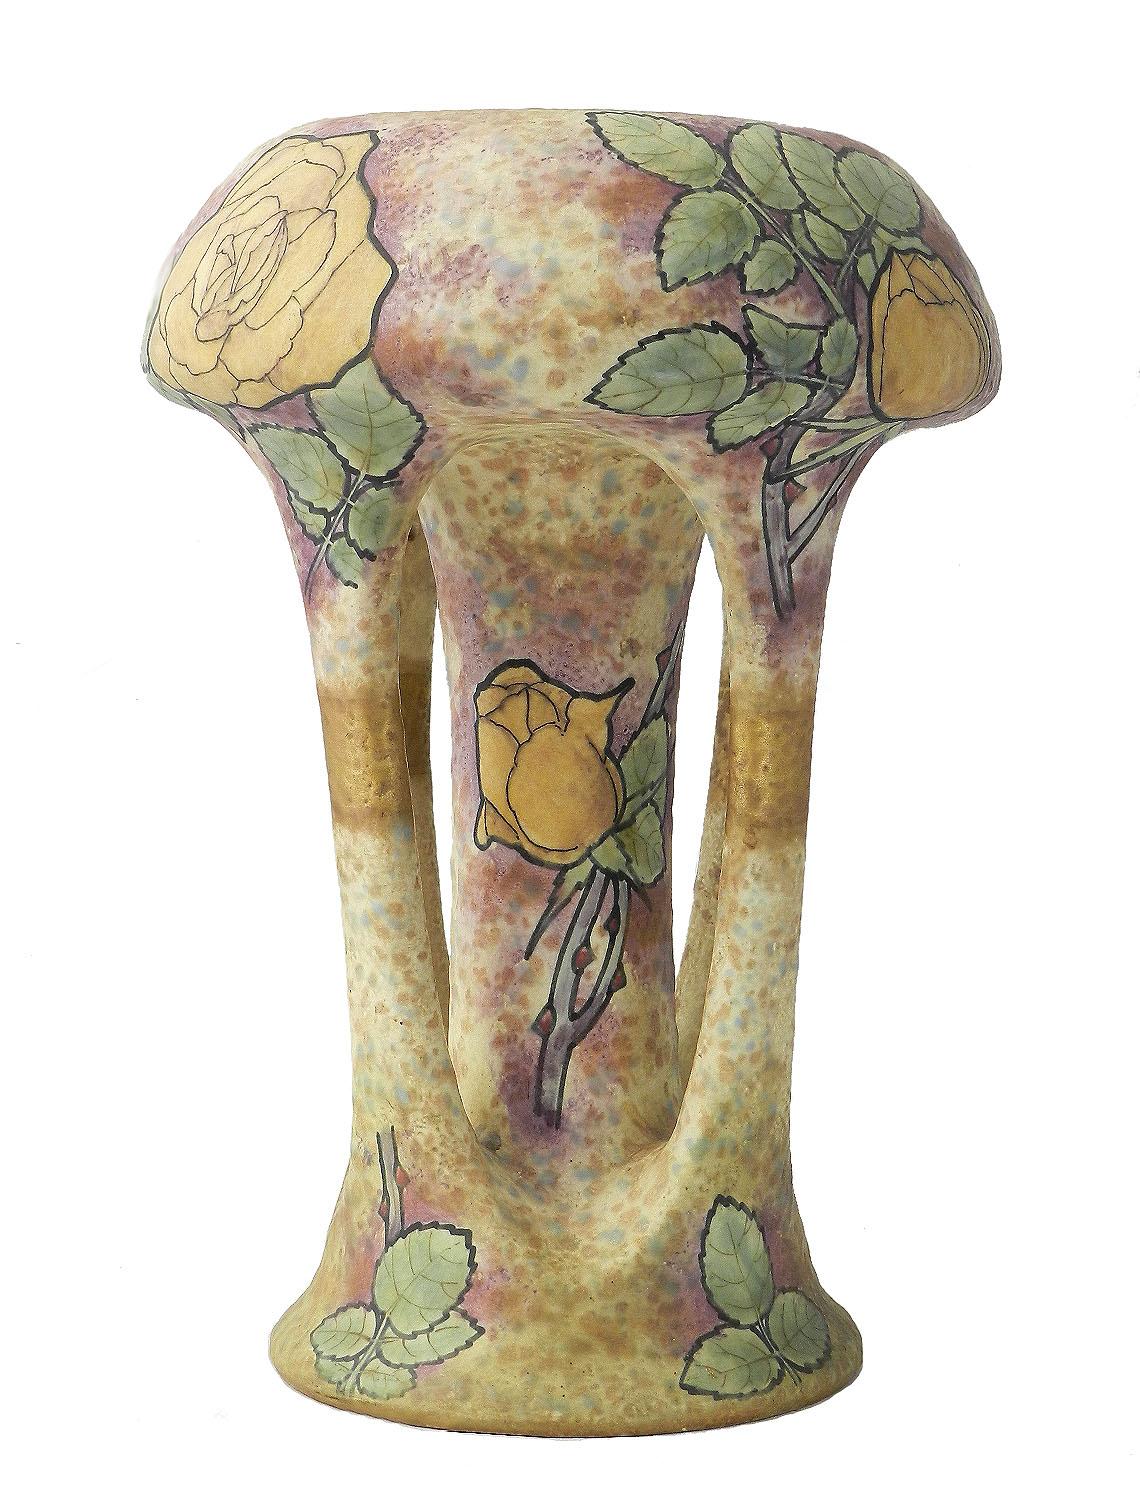 Art Nouveau Amphora vase by Amphora, Austria, circa 1900
Large
Hand decorated
Superb quality marked to base with crown and number
Excellent condition for its age
Manufactured for Riessner, Stellmacher & Kessel (RStK) Amphora of Turn-Teplitz,